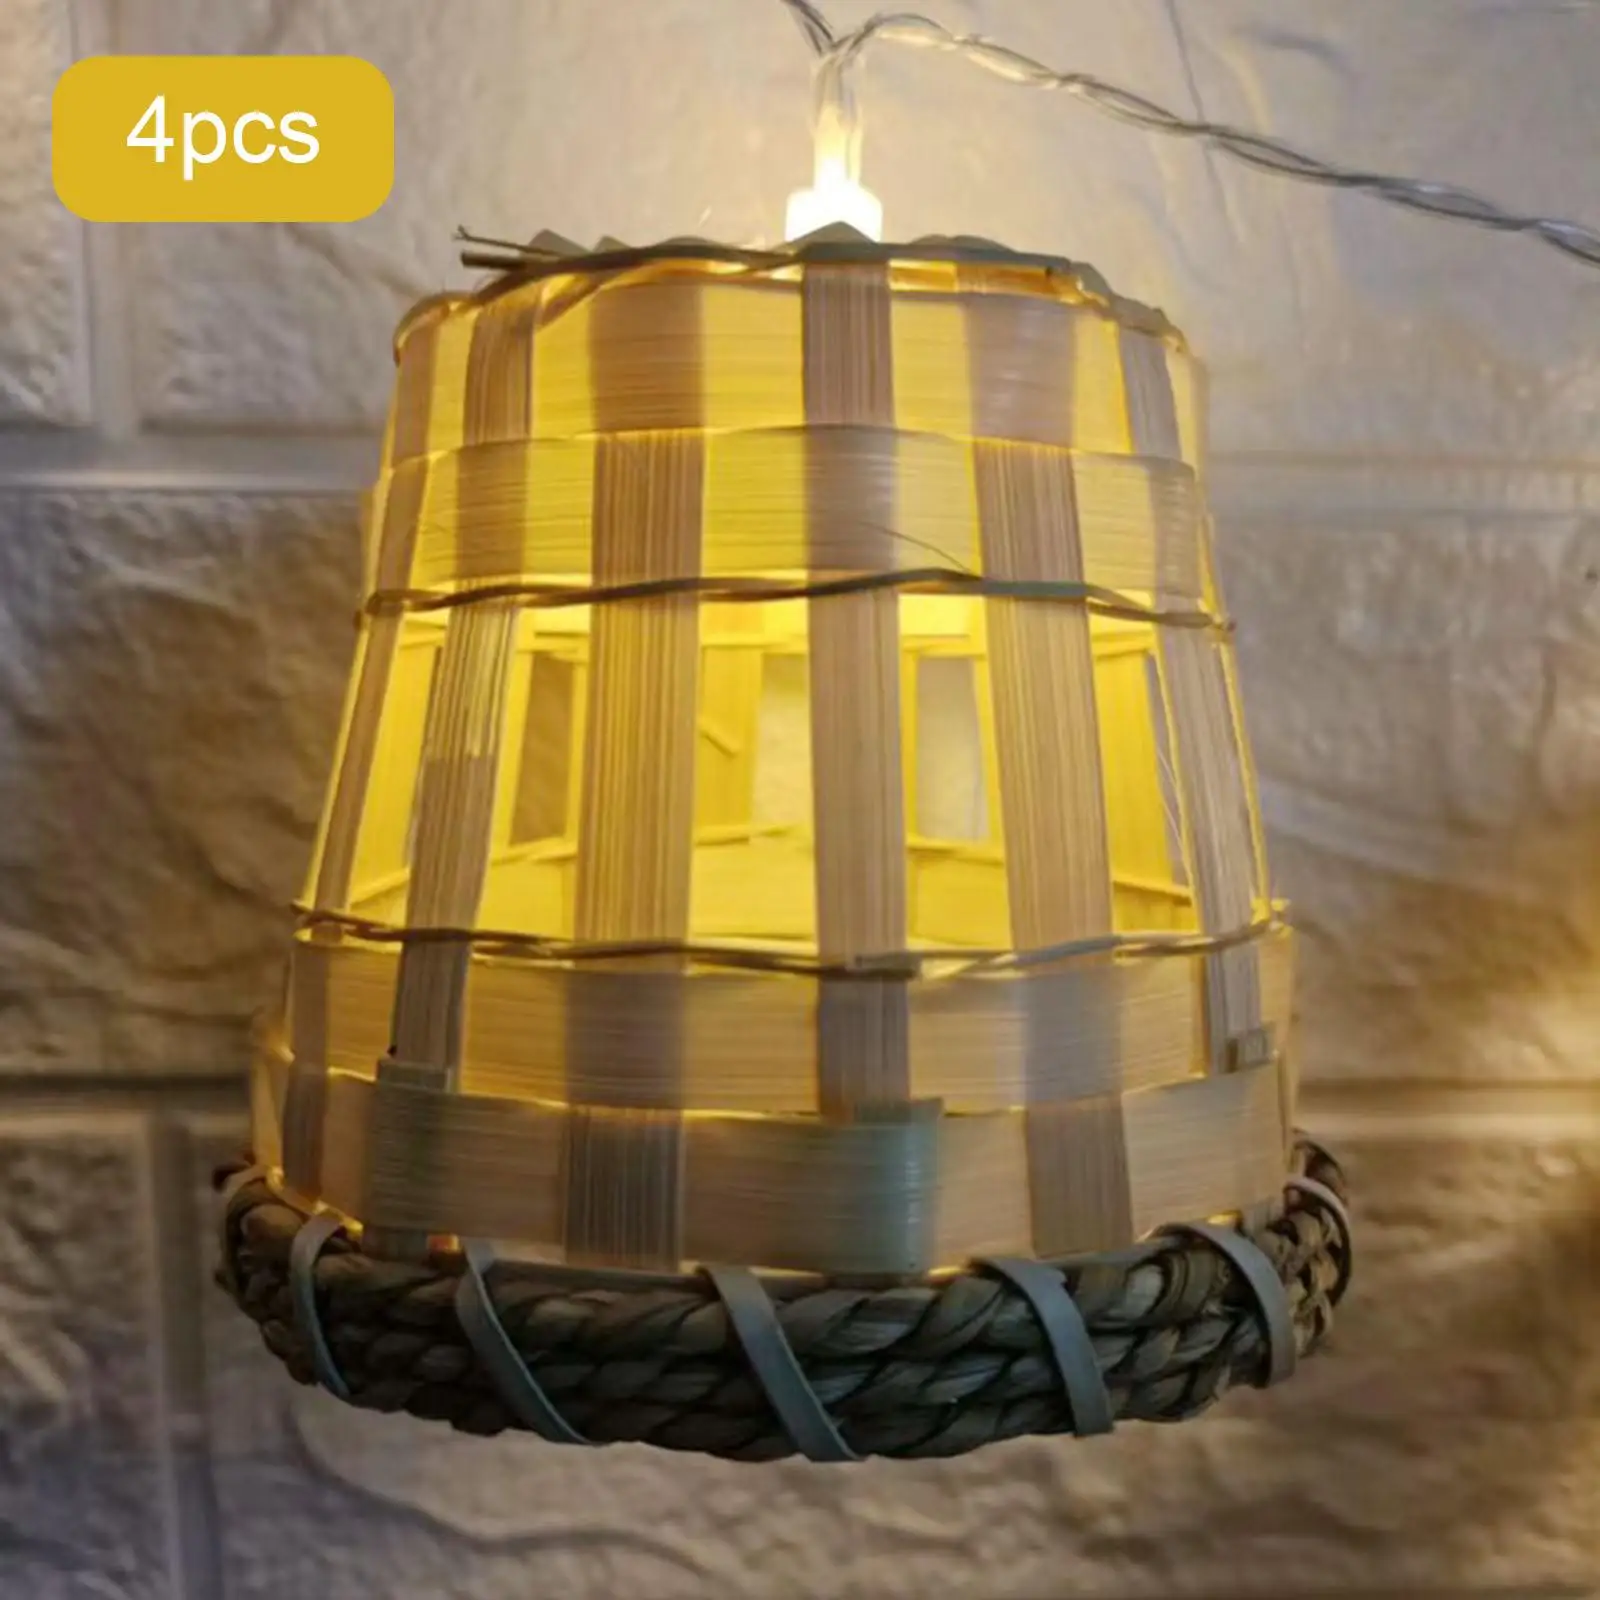 1 Pack Mini Decorative Replacement Chandelier Shades Light Cover Chandelier Light Shade for Dining Room Bedroom Kitchen Bar Home